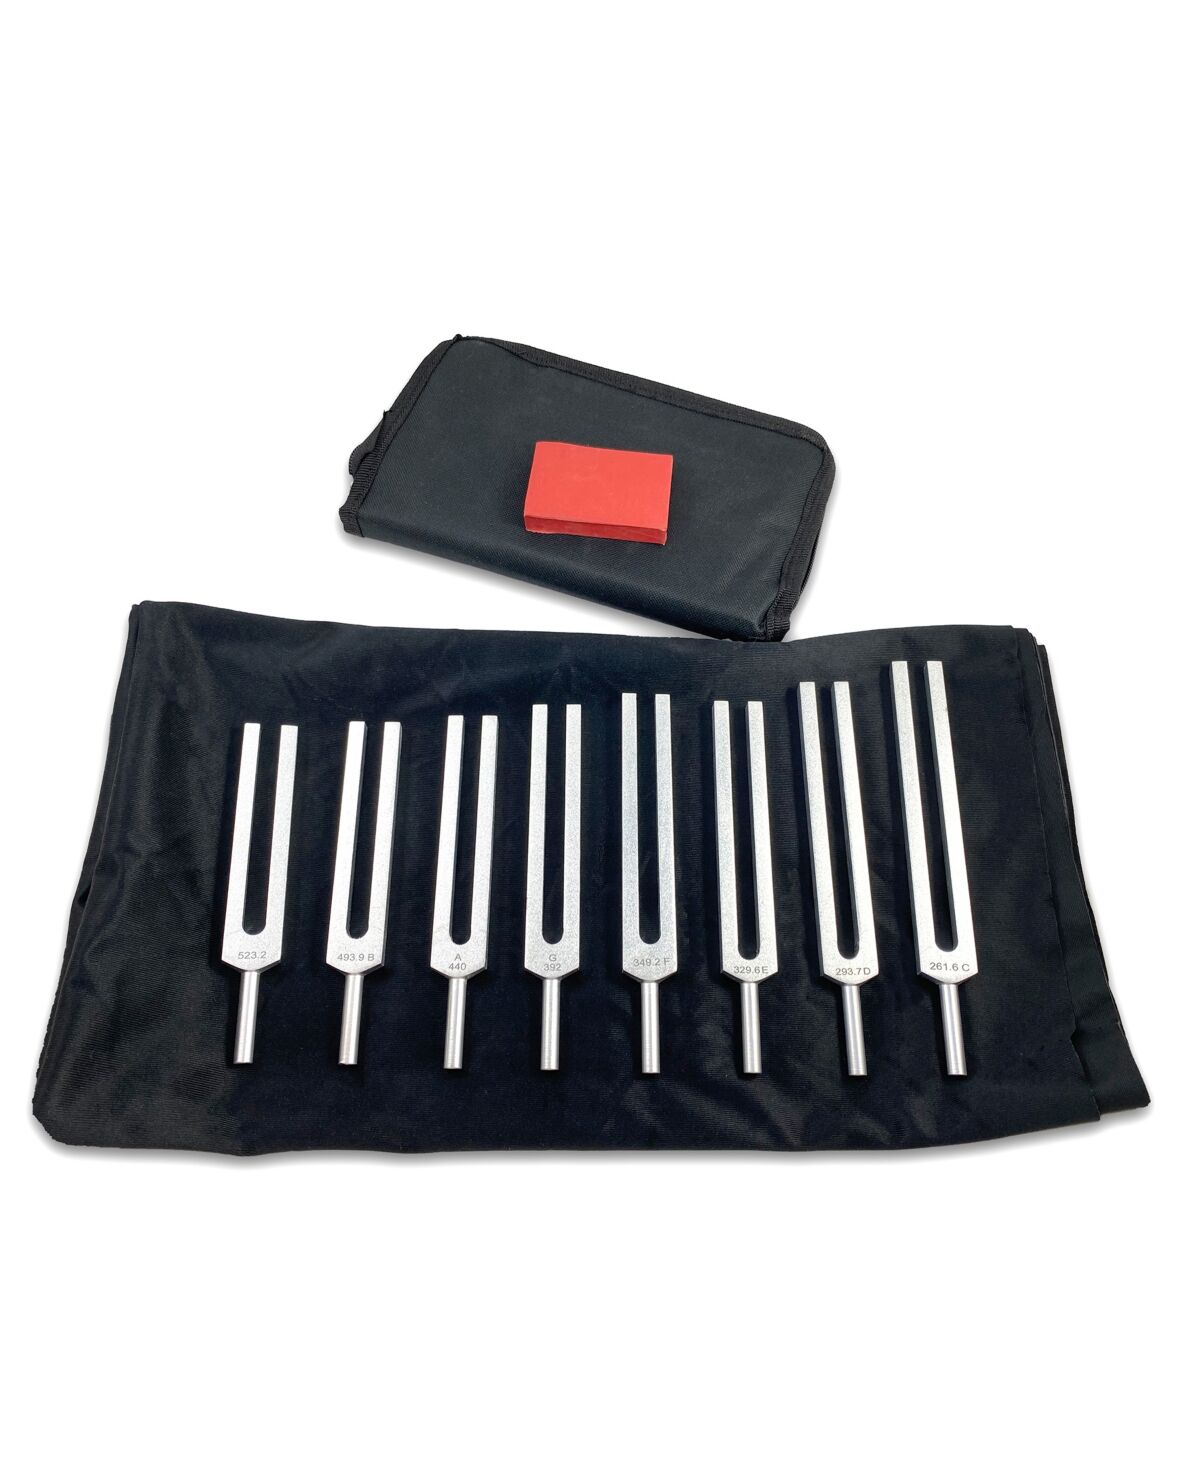 Supertek Music Tuning Fork with Activator and Case Set, 8 Piece - Silver-Tone, Black, Red